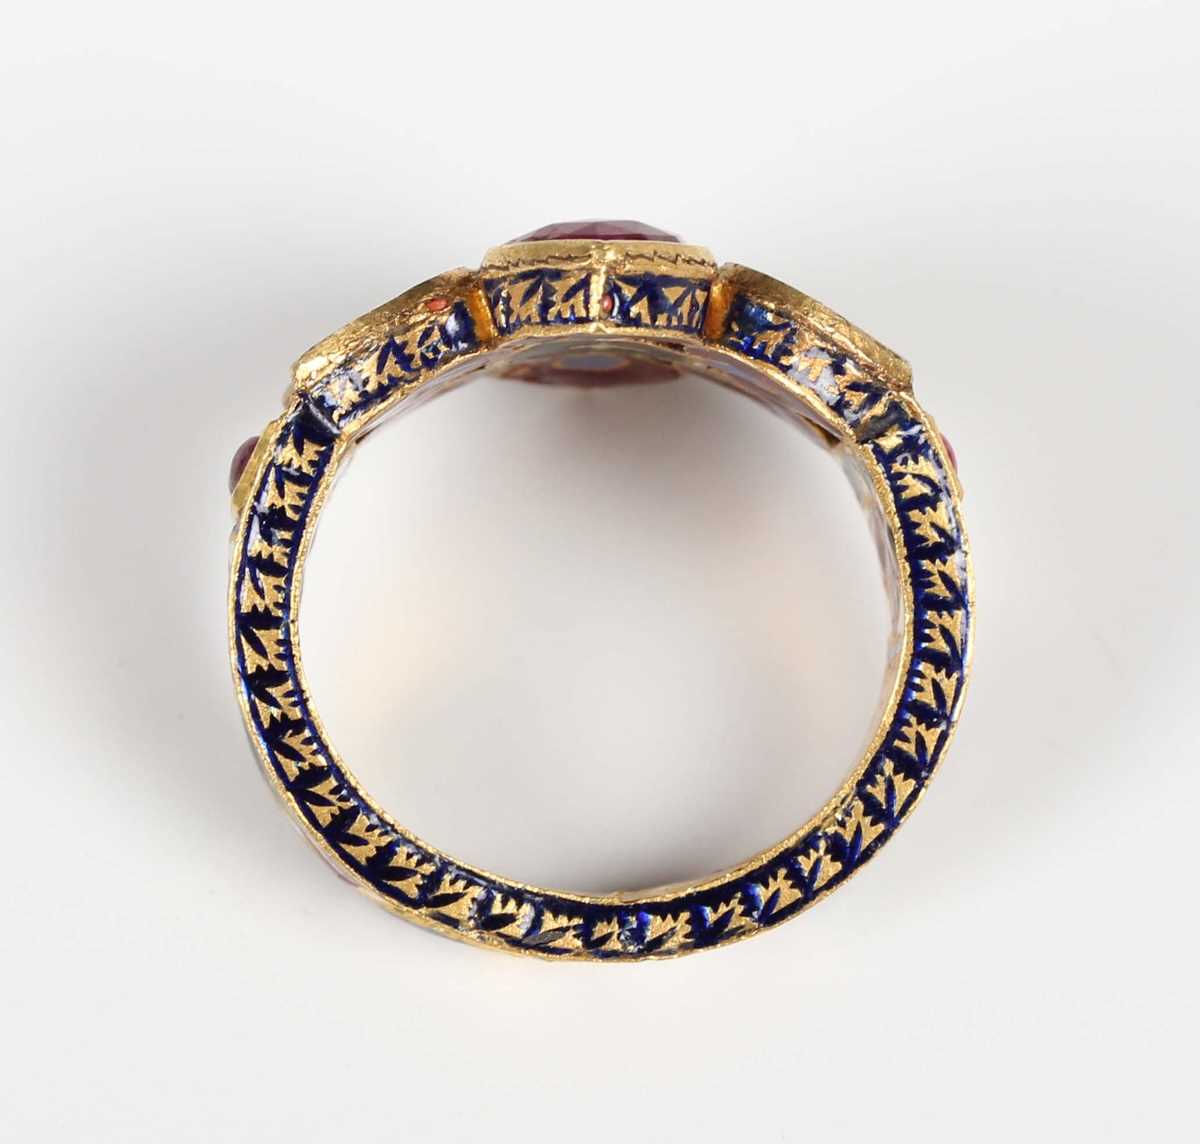 A Middle Eastern gold, ruby, diamond and varicoloured enamelled ring, probably Indian, designed as a - Image 5 of 6